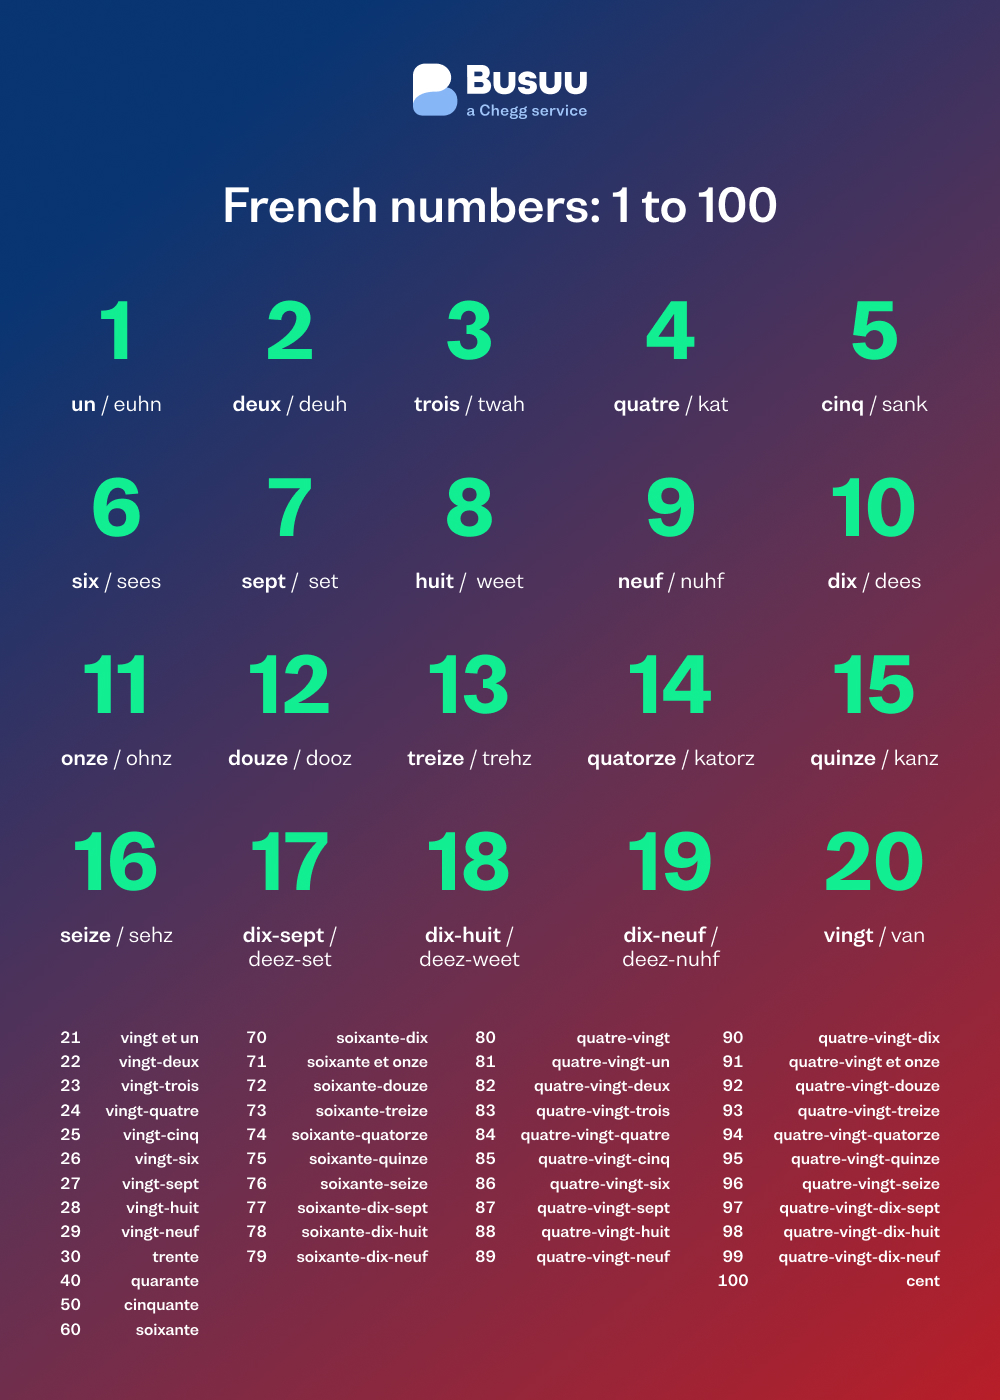 French numbers chart, courtesy of language-learning app Busuu's French numbers guide